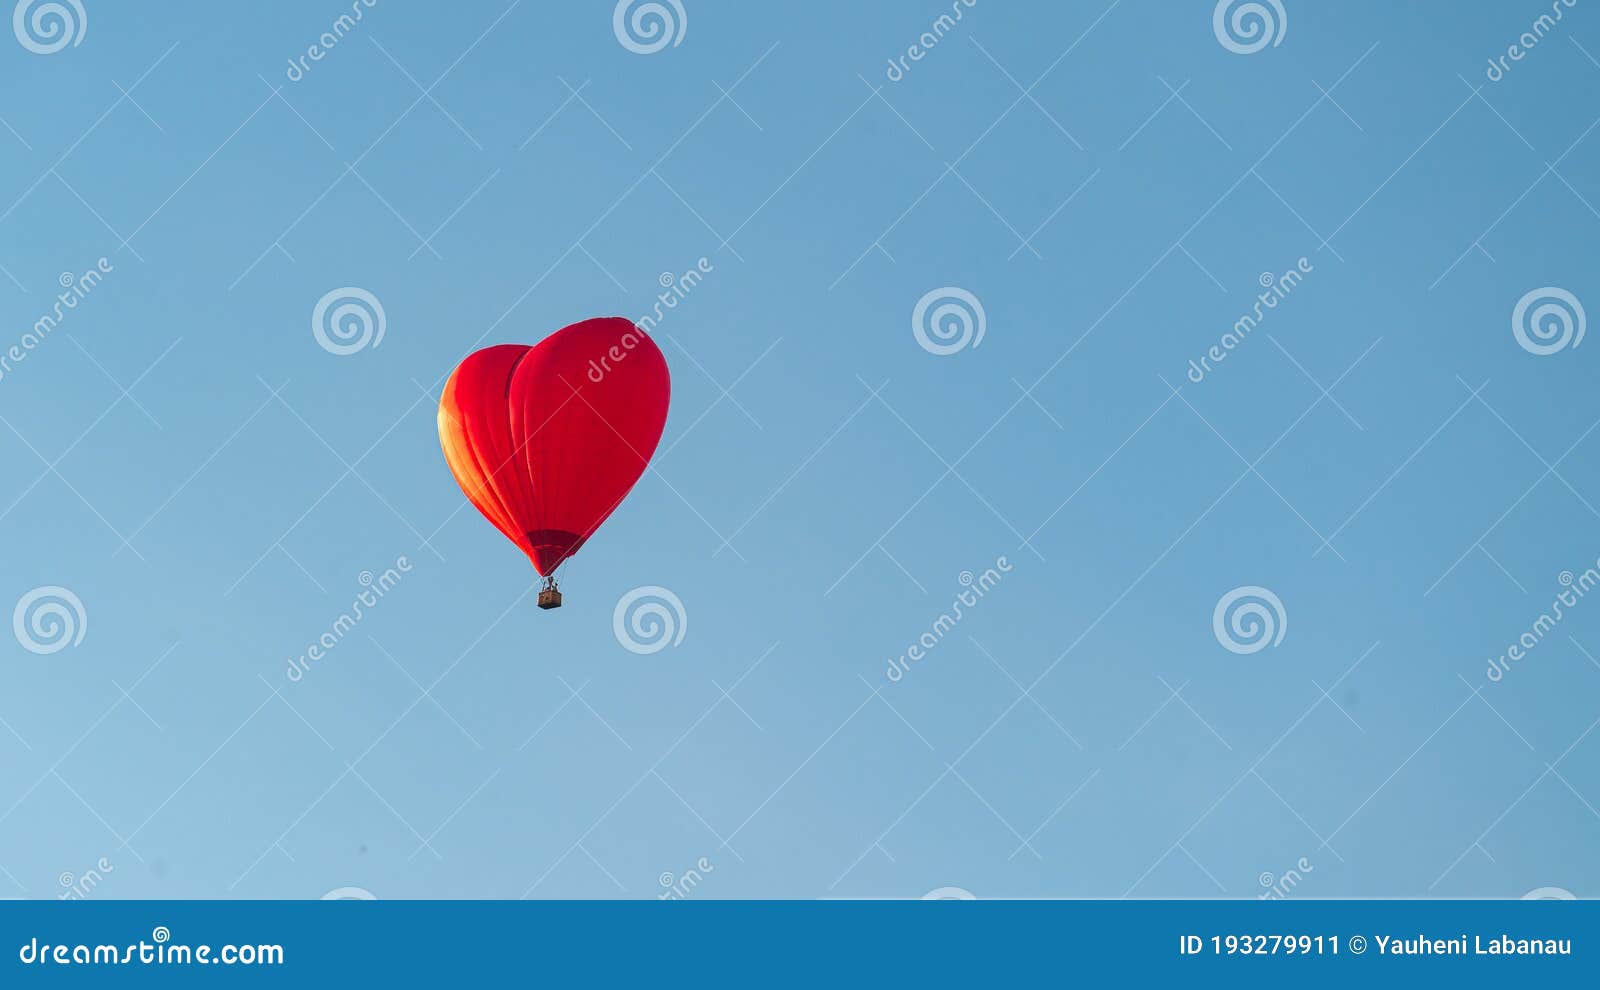 Globos Corazones Rojos Stock Photos and Pictures - 200,420 Images